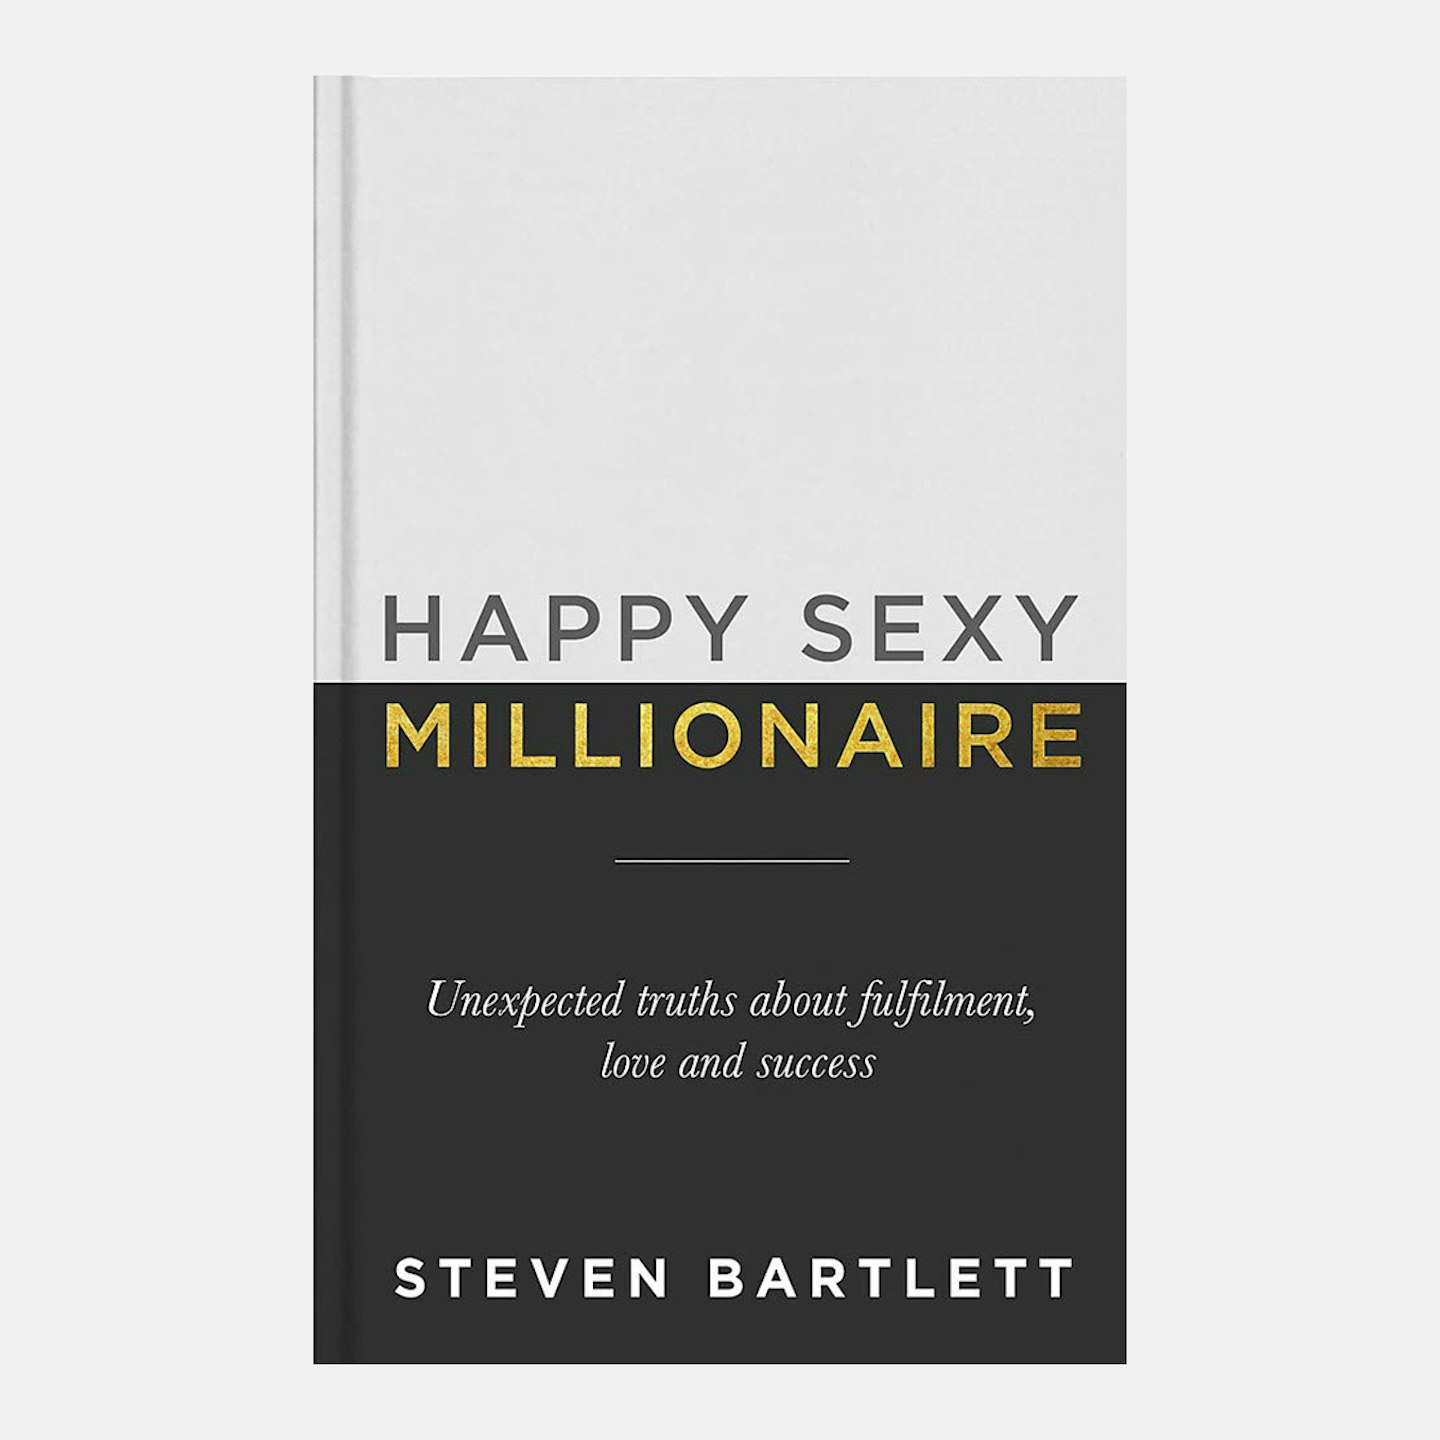 Happy Sexy Millionaire: Unexpected Truths about Fulfilment, Love and Success by Steven Bartlett